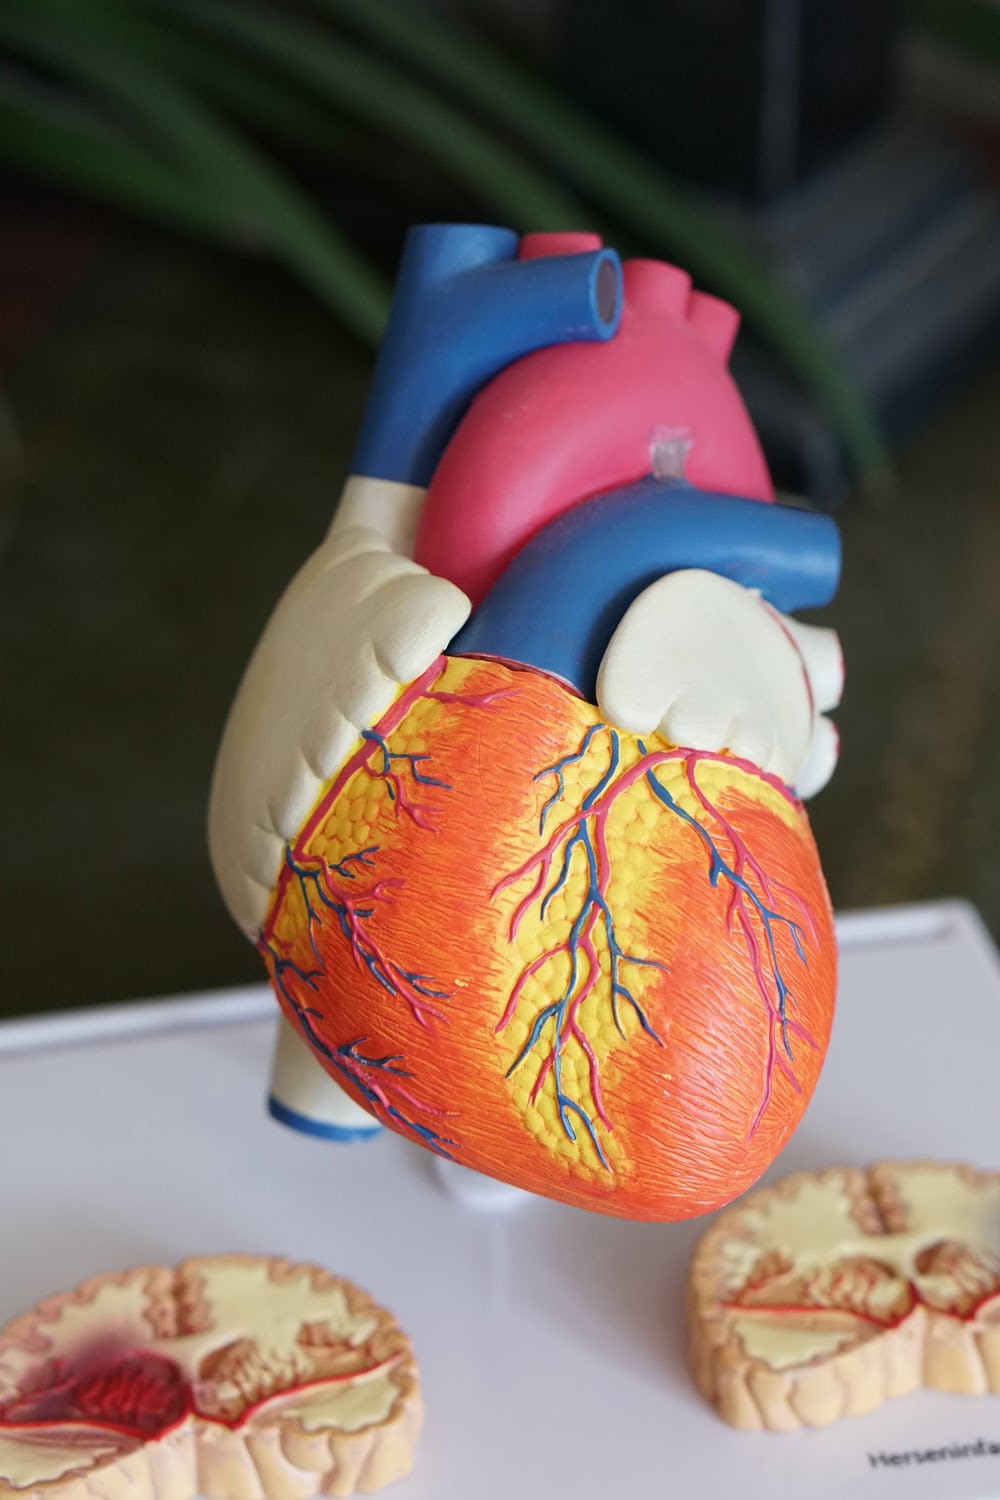 The coronary arteries that supply the heart become blocked by a build-up of fatty substances in the artery wall - reducing blood flow. The disease causes heart attack (where blood supply becomes completely blocked), can lead to heart failure (where the heart muscle becomes damaged), and is linked to a number of factors including smoking, high cholesterol, high blood pressure and diabetes.